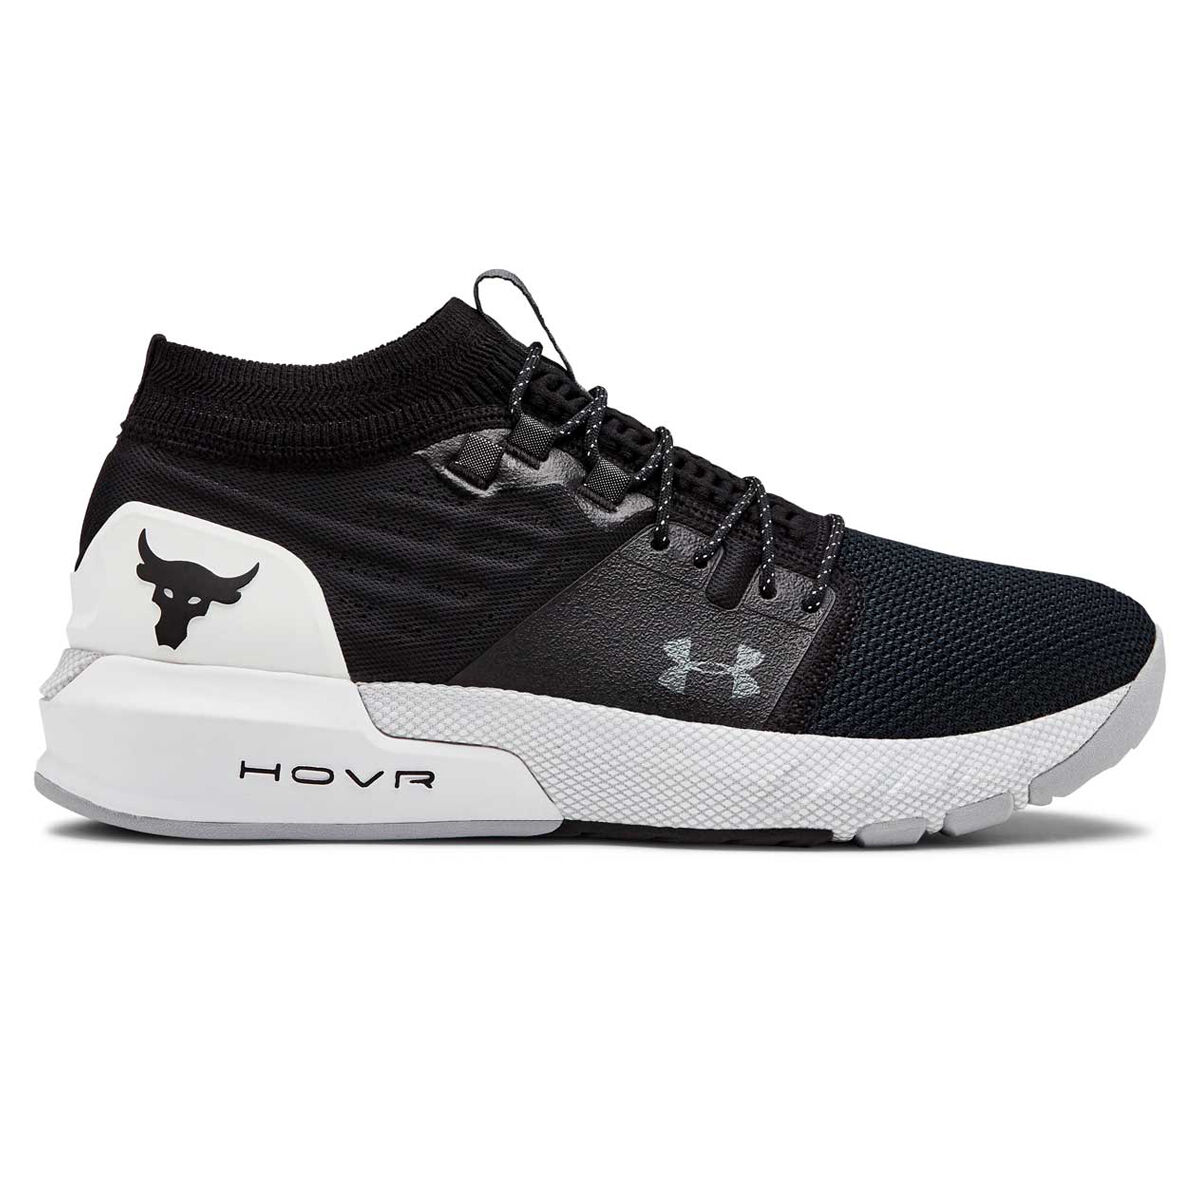 under armor high top shoes